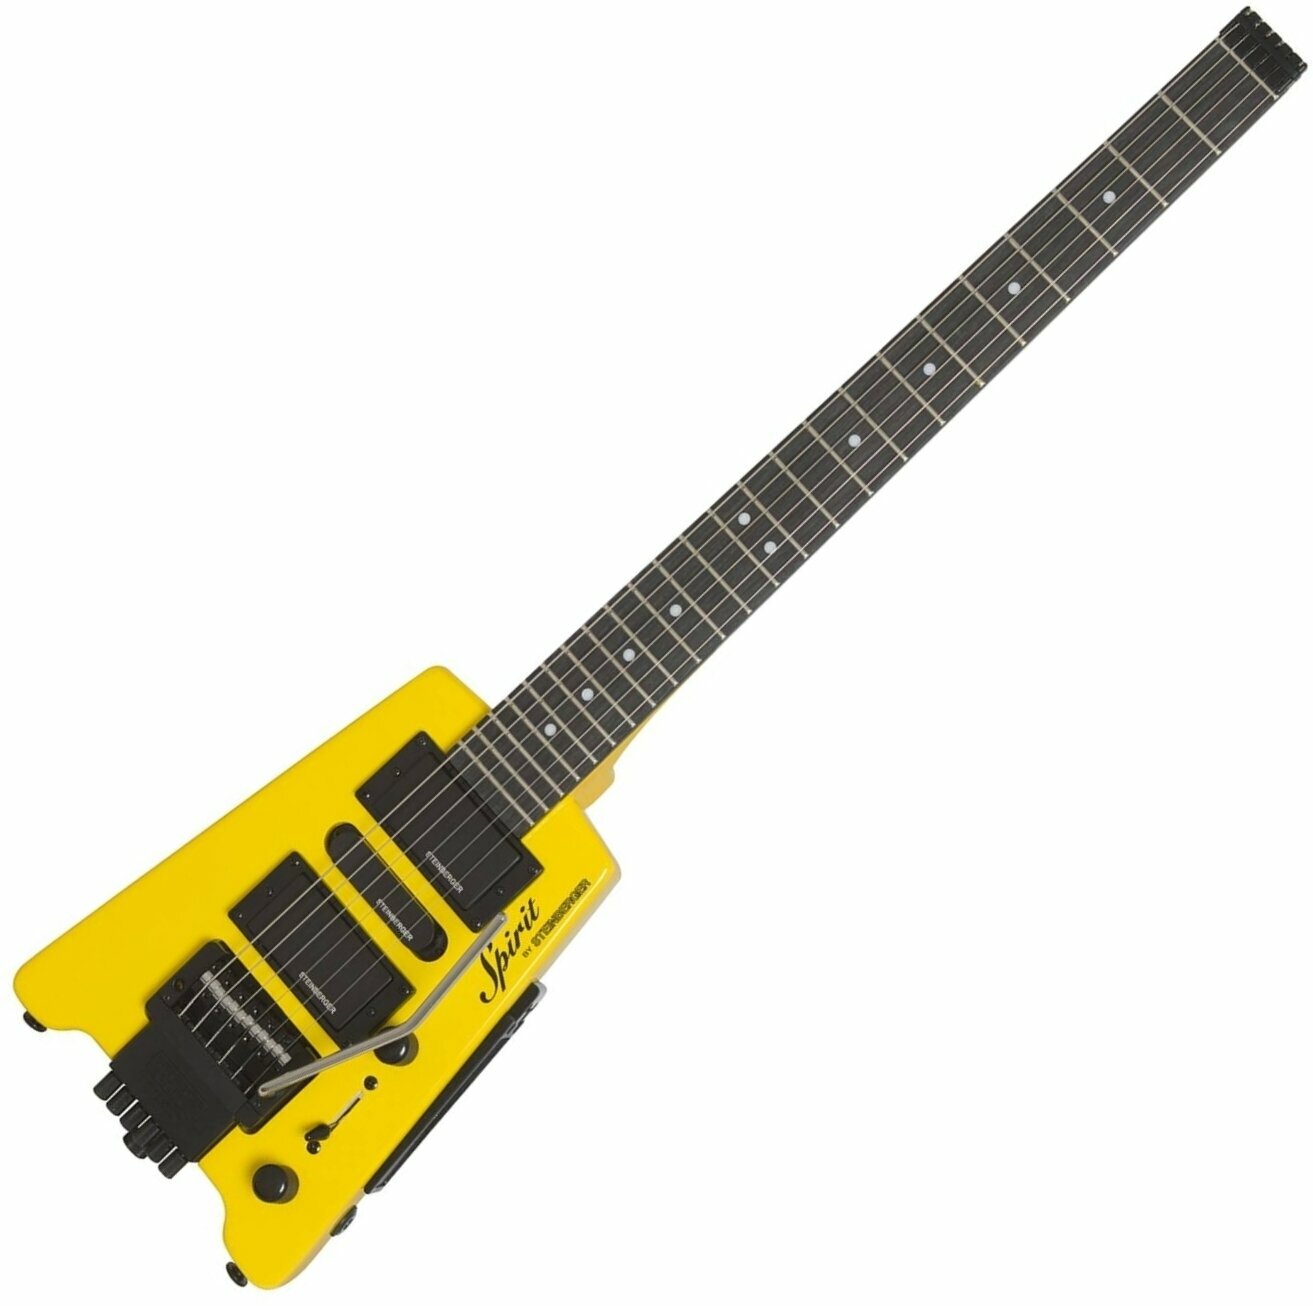 Headless-kitara Steinberger Spirit Gt-Pro Deluxe Outfit Hb-Sc-Hb Hot Rod Yellow